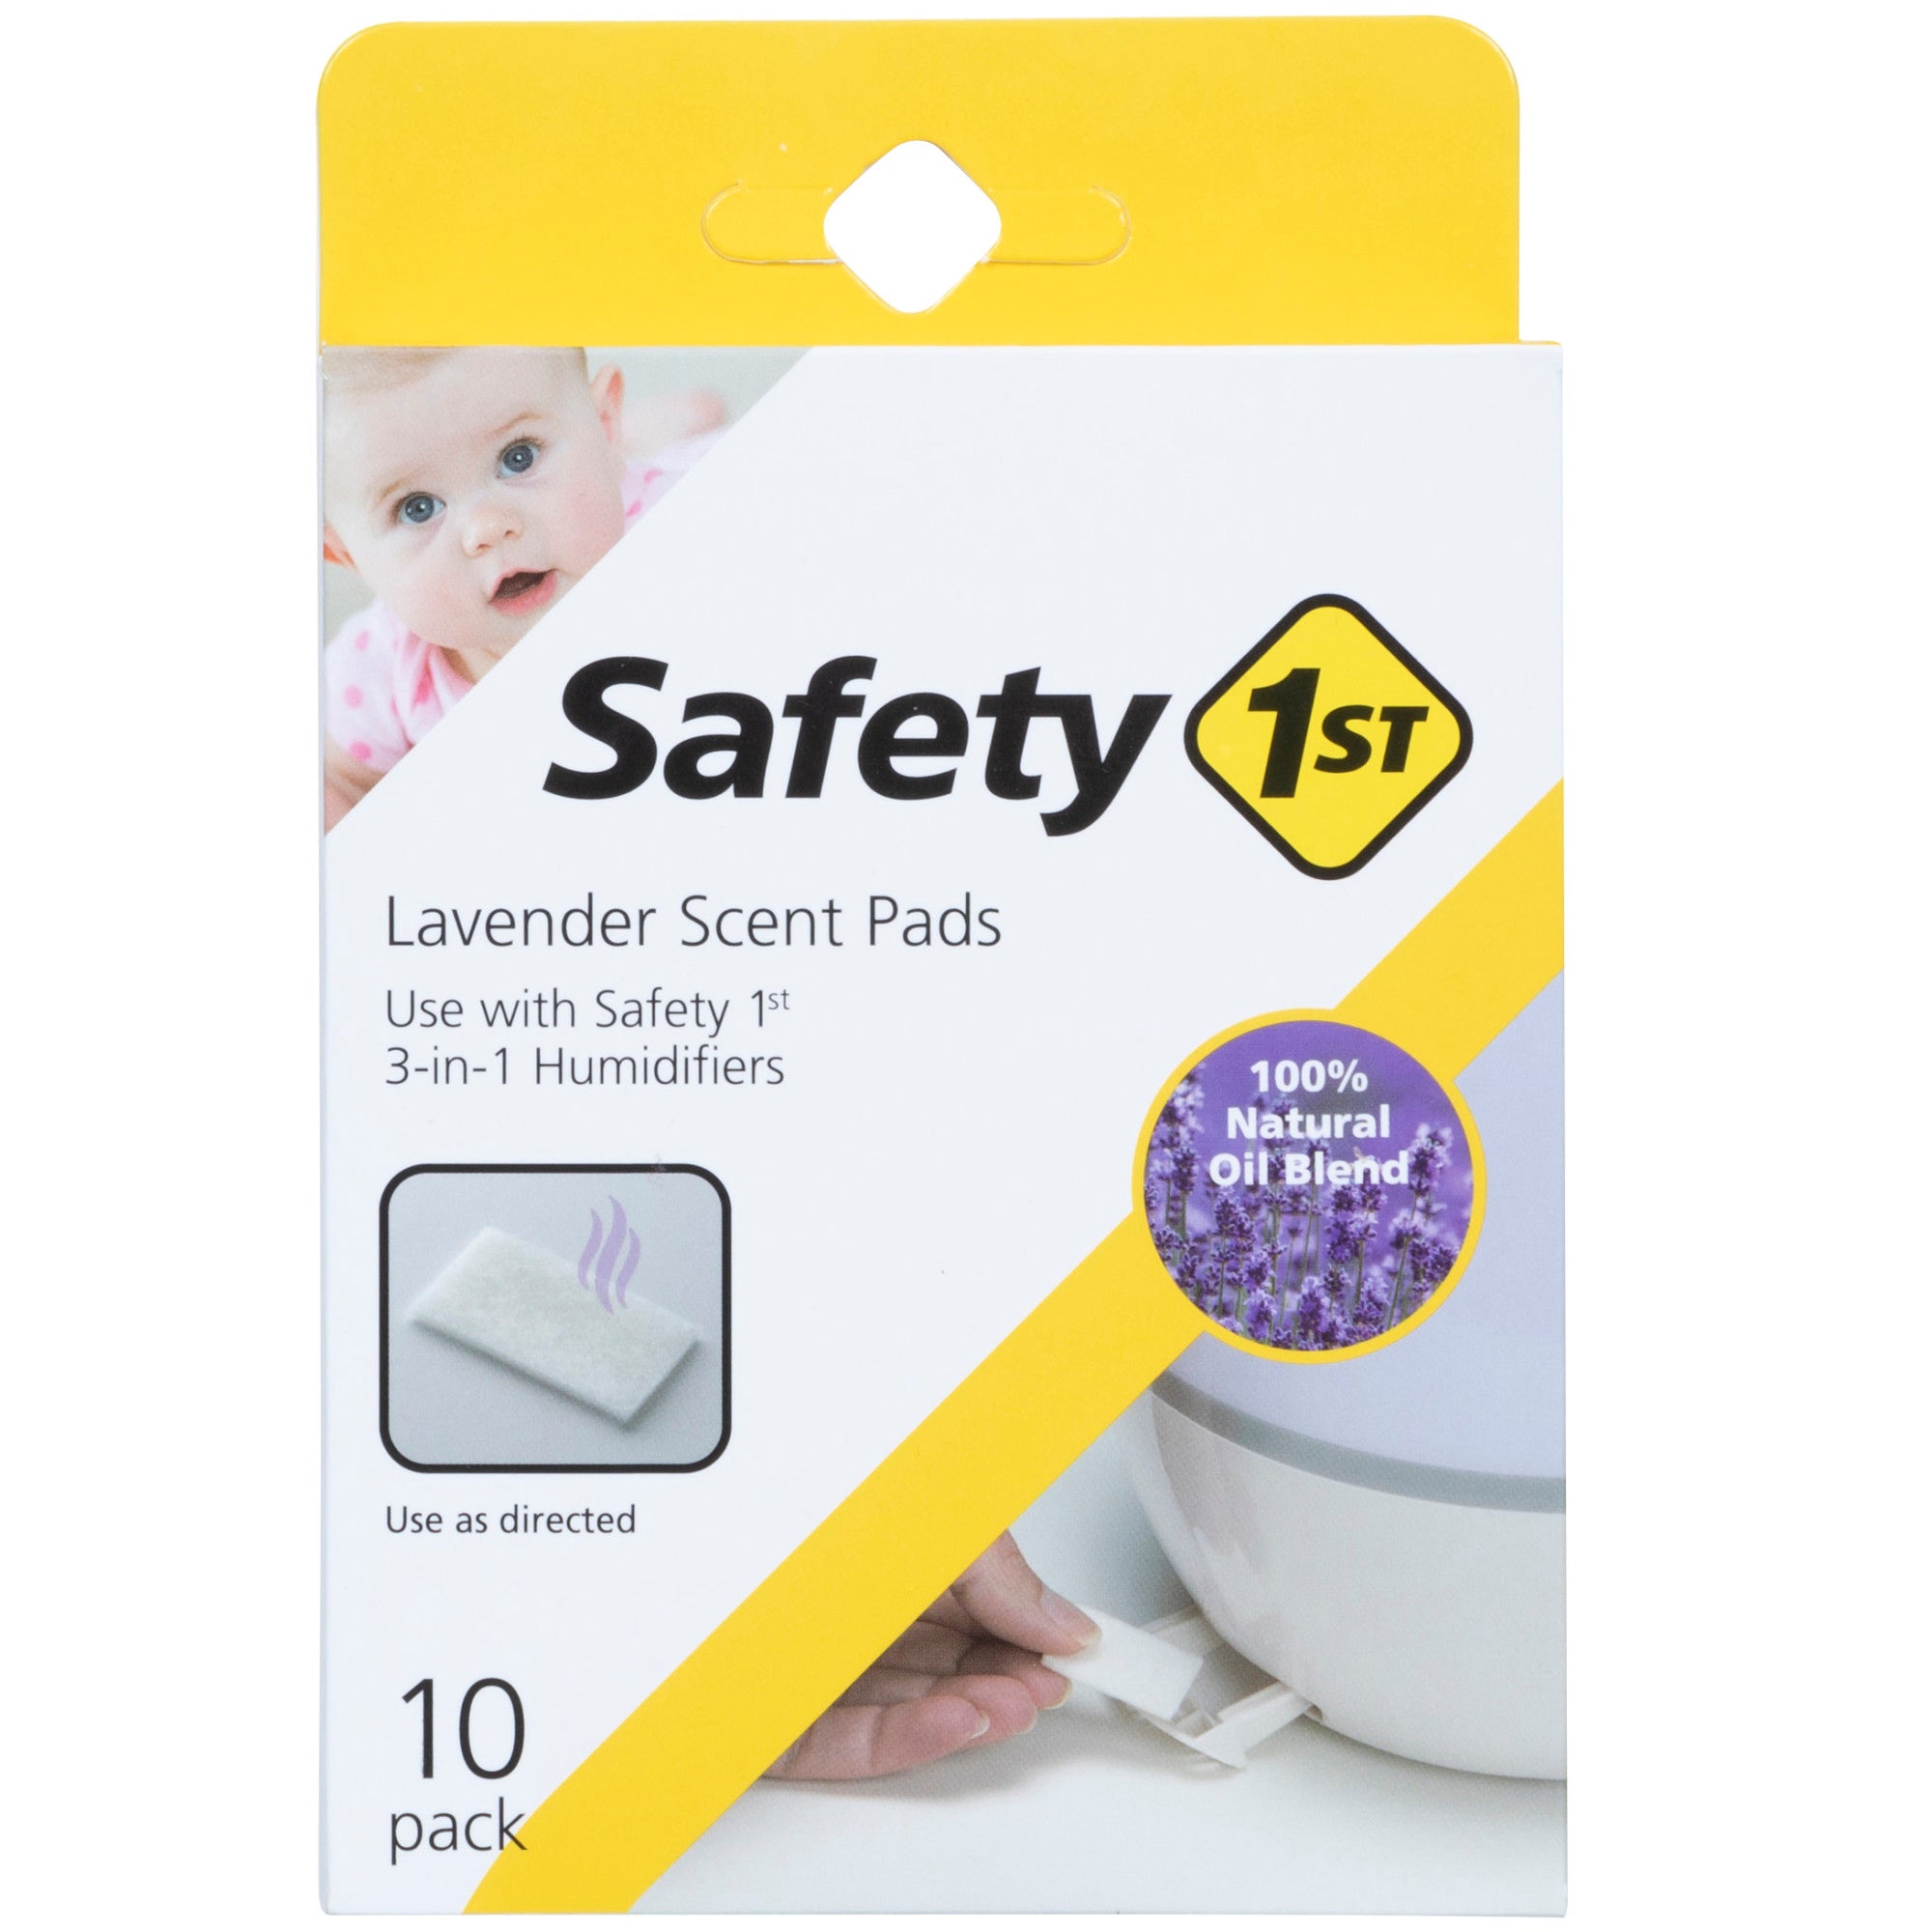 Safety 1st lavender scent pads. Use with Safety 1st 3-in-1 humidifiers